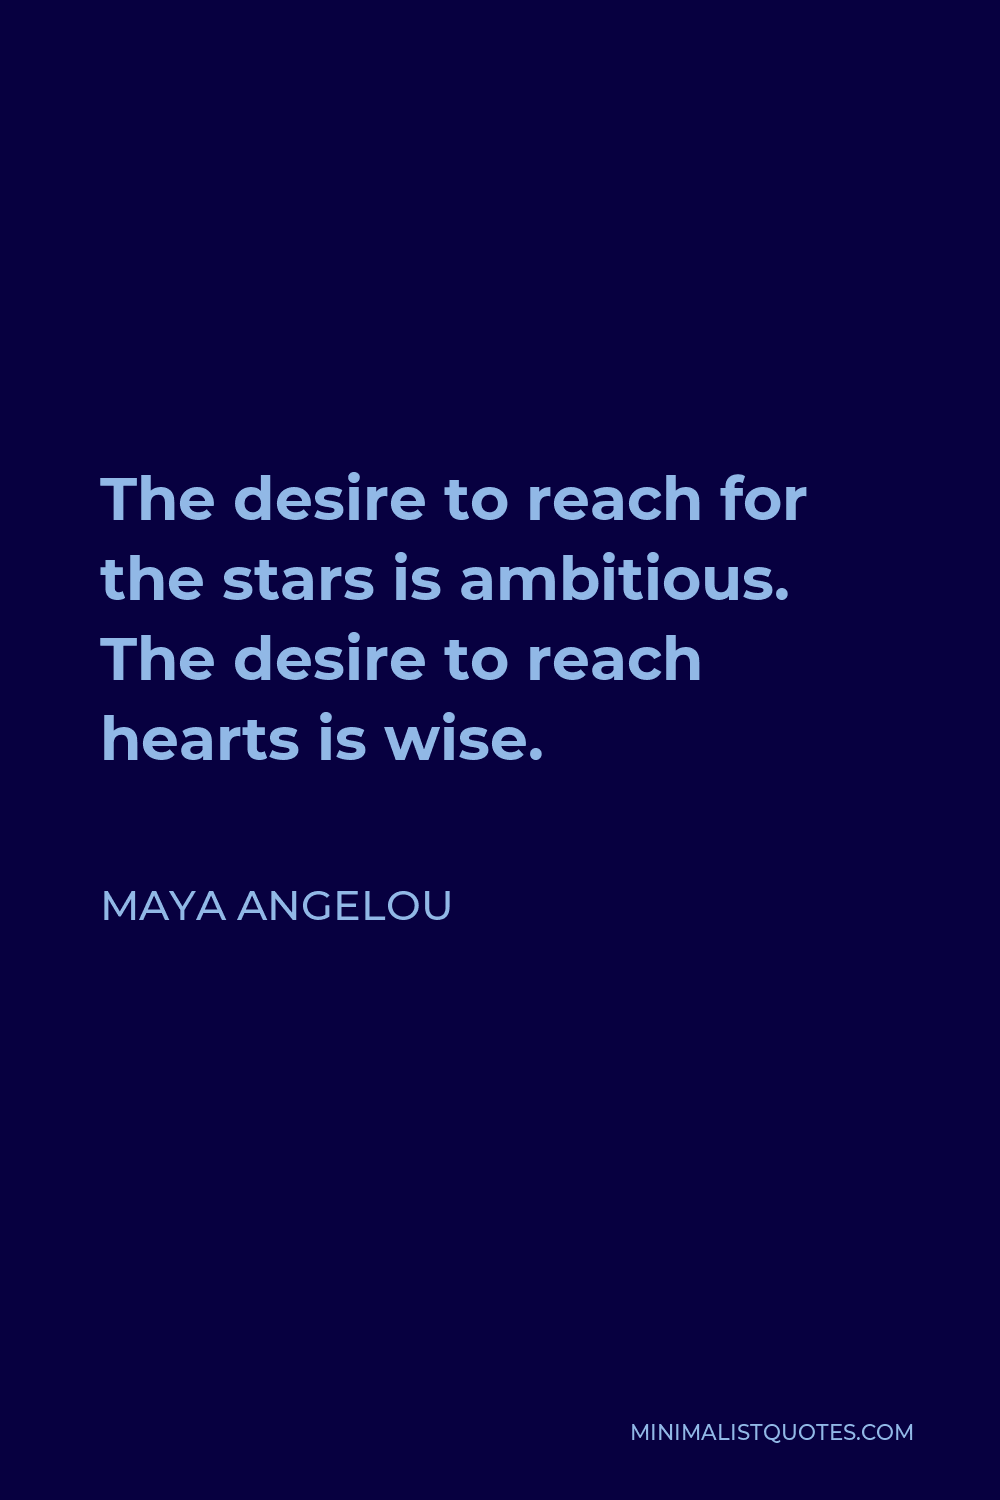 Maya Angelou Quote - The desire to reach for the stars is ambitious. The desire to reach hearts is wise.